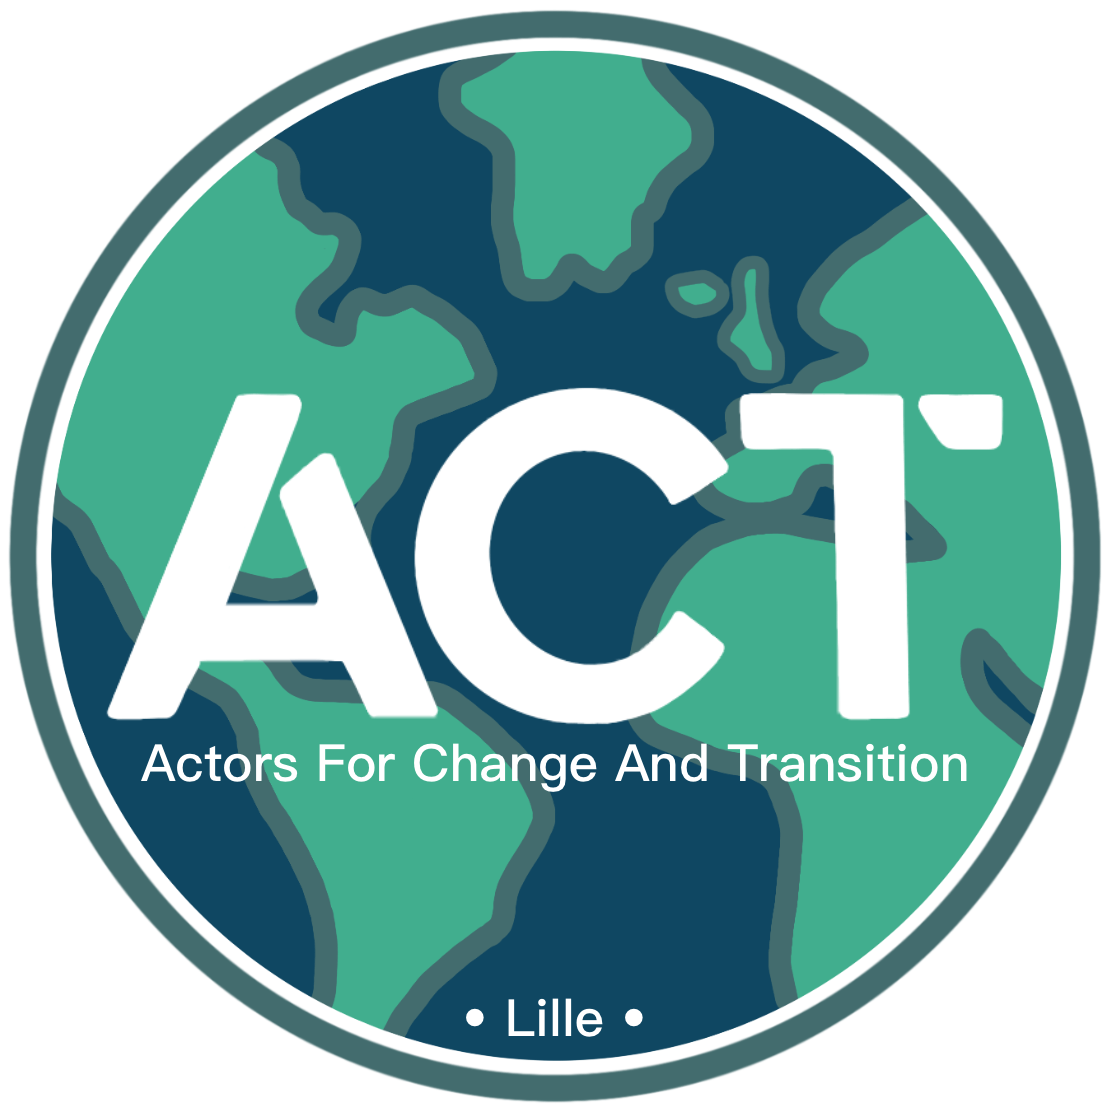 Actors for Change and Transition